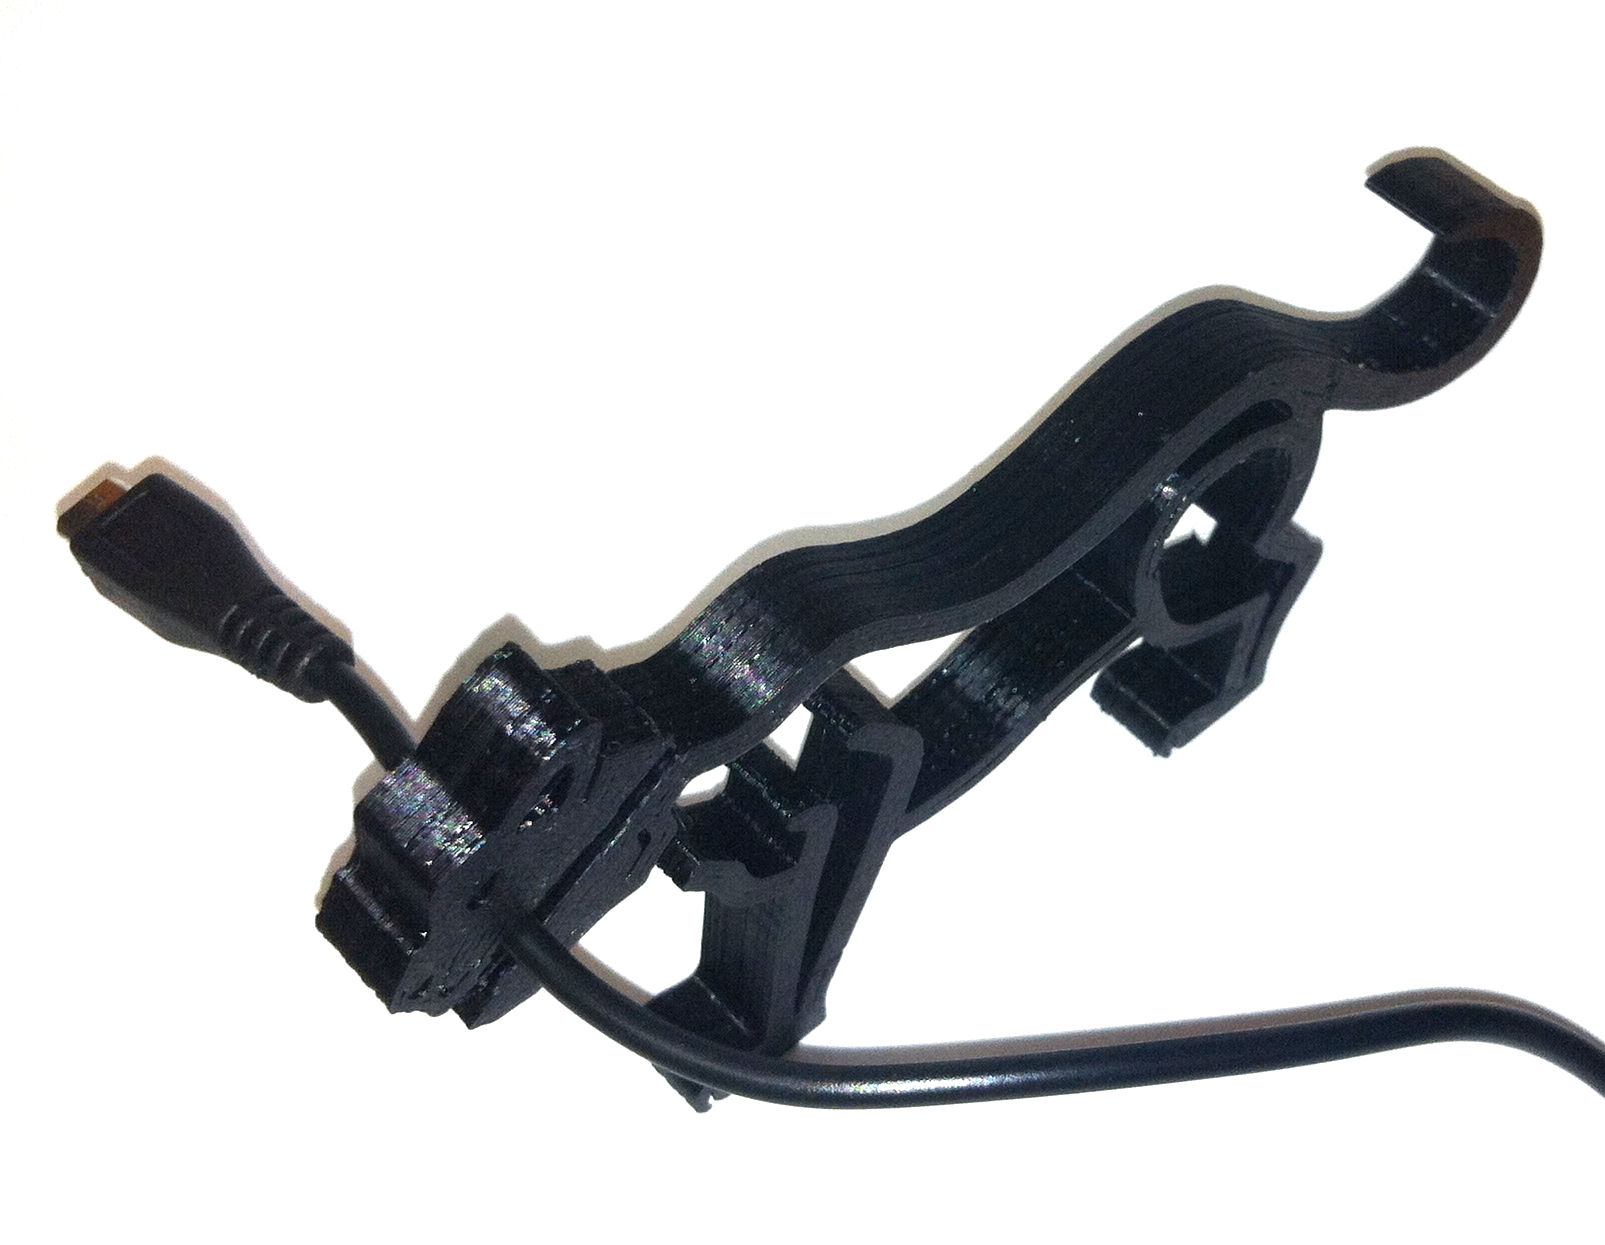 Wild Cat clamplike device - Click Image to Close